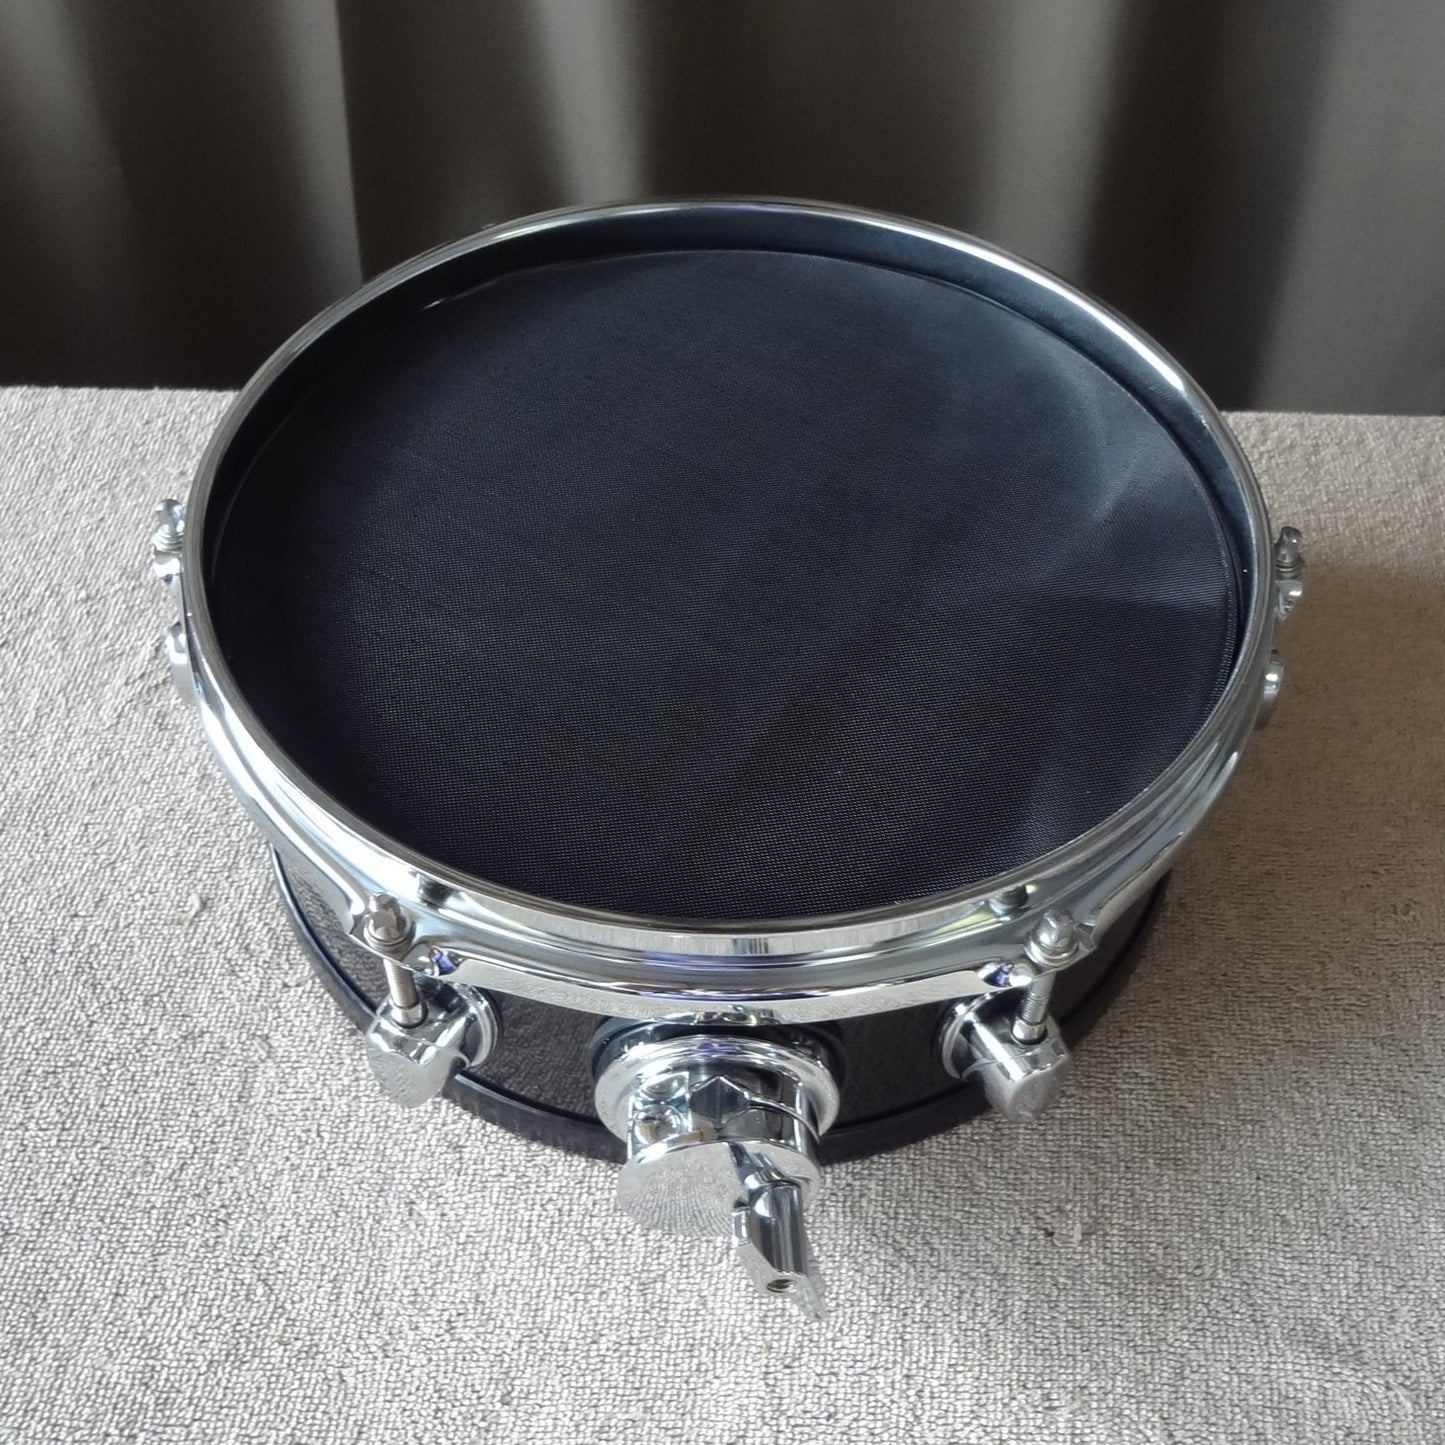 Top down view of new 10 inch custom electronic snare drum